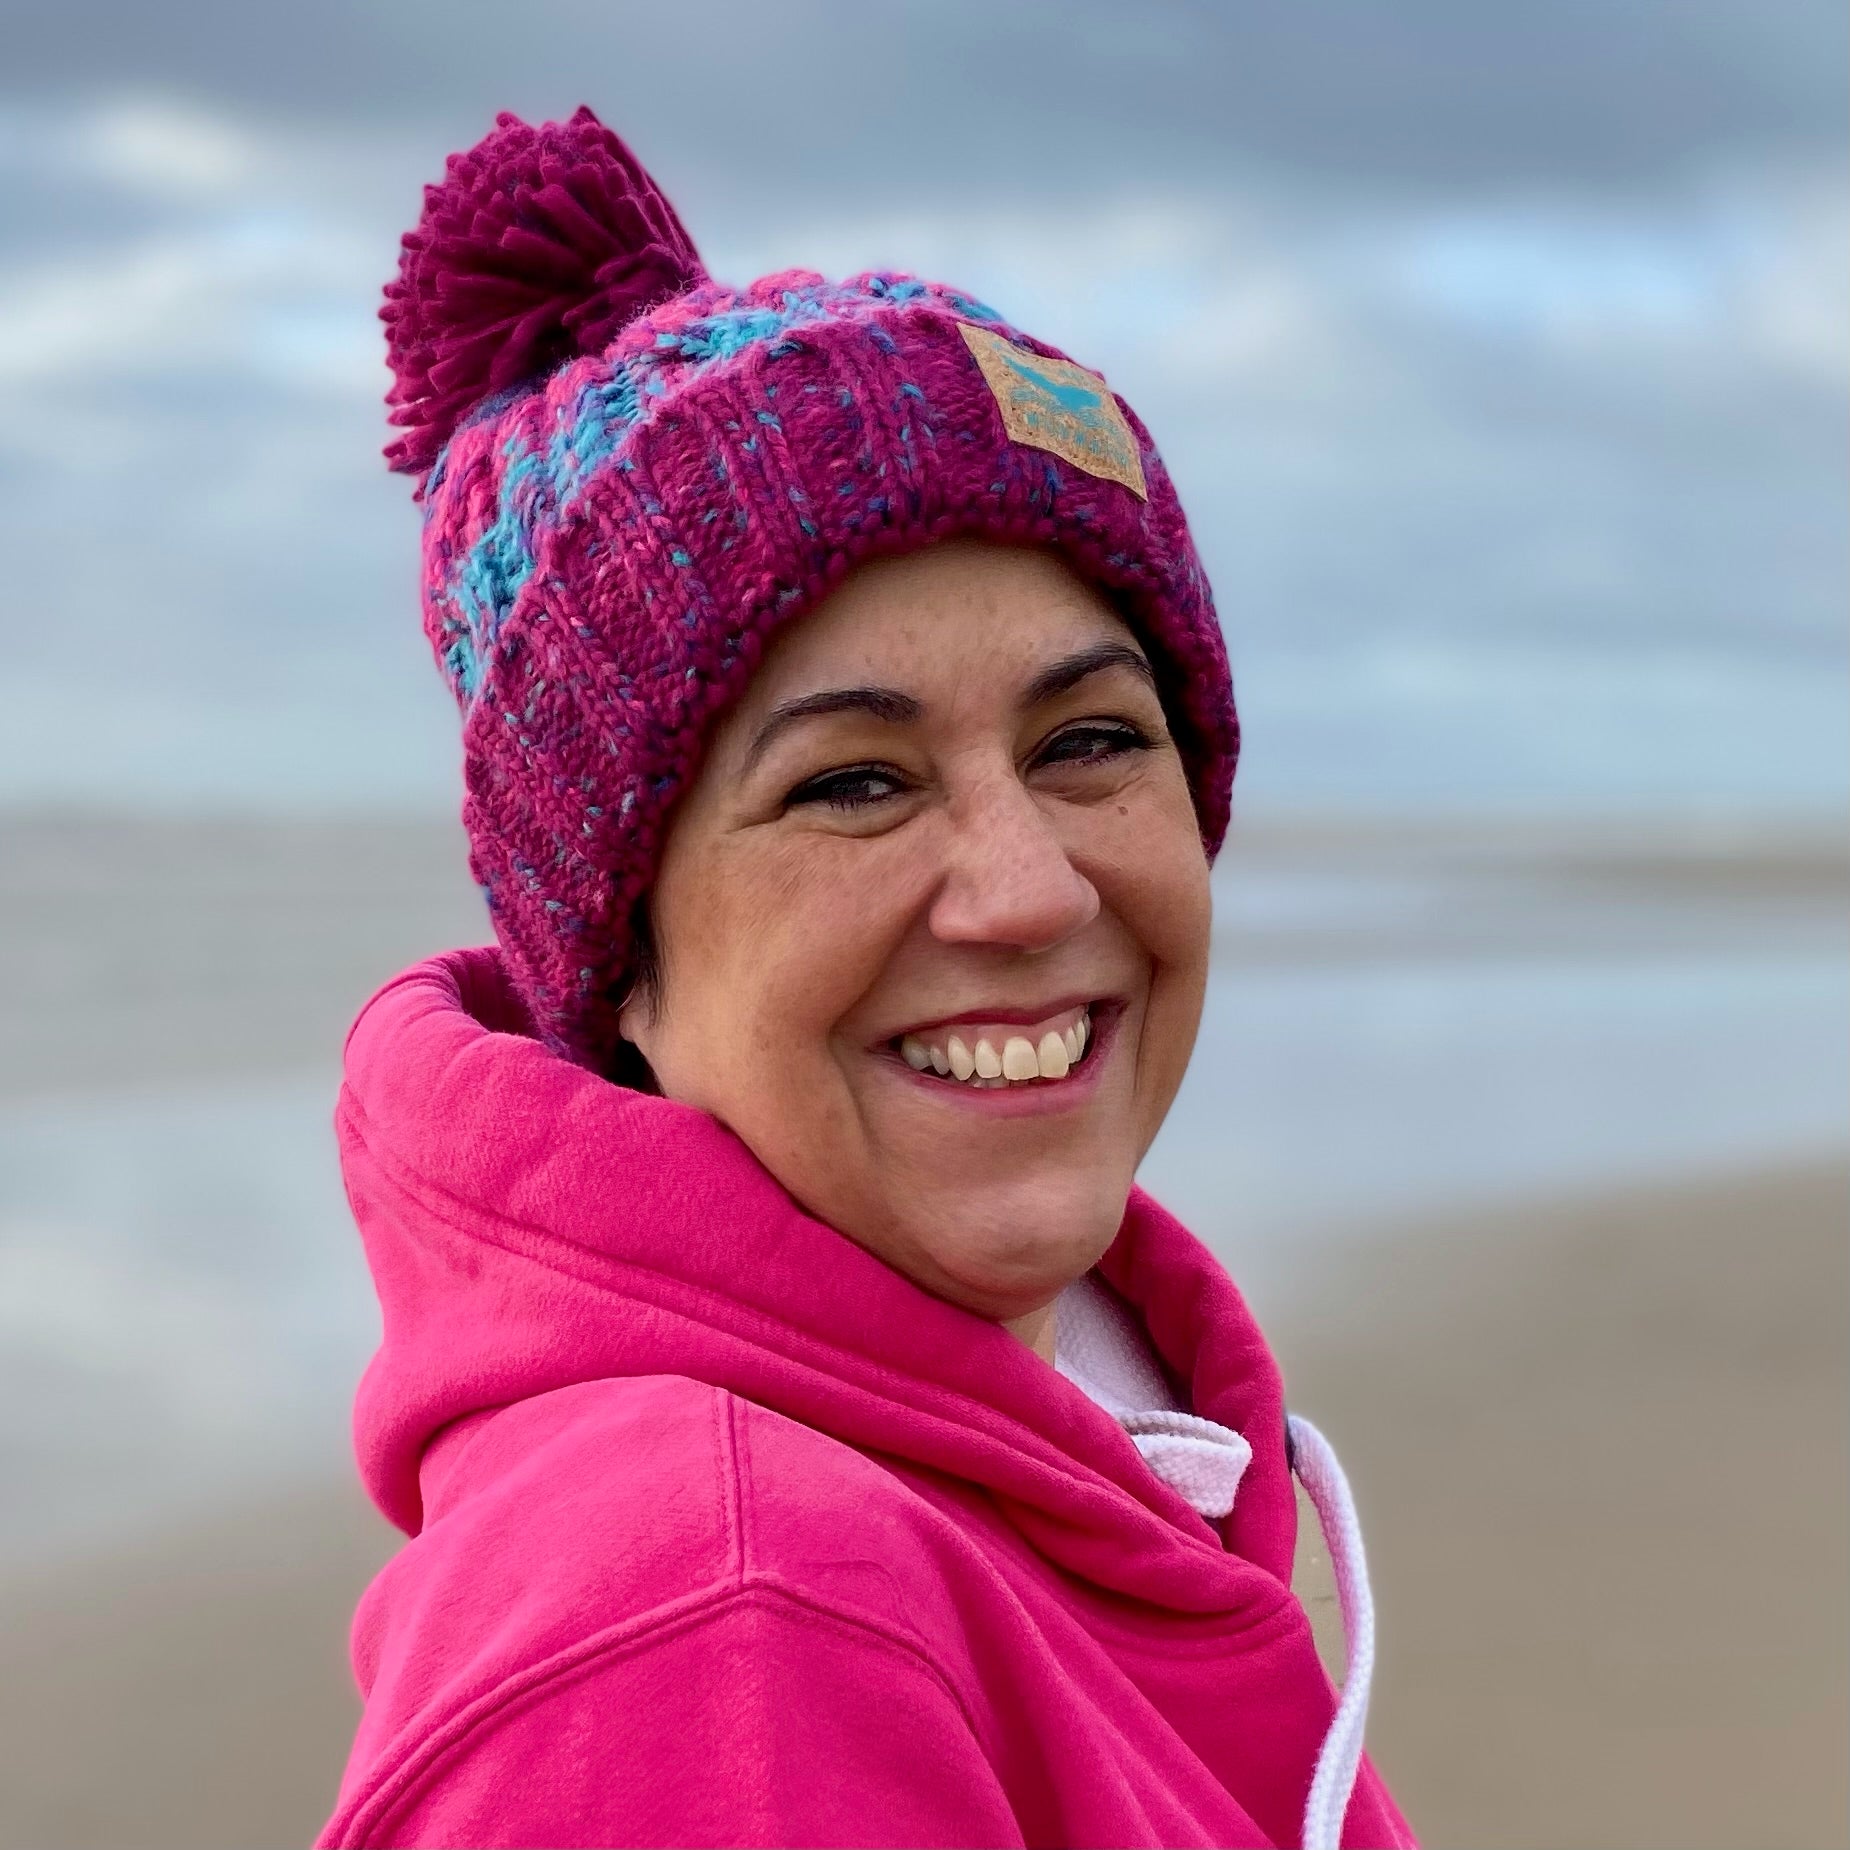 Woman wearing a pink knitted beanie hat with a pom pom.